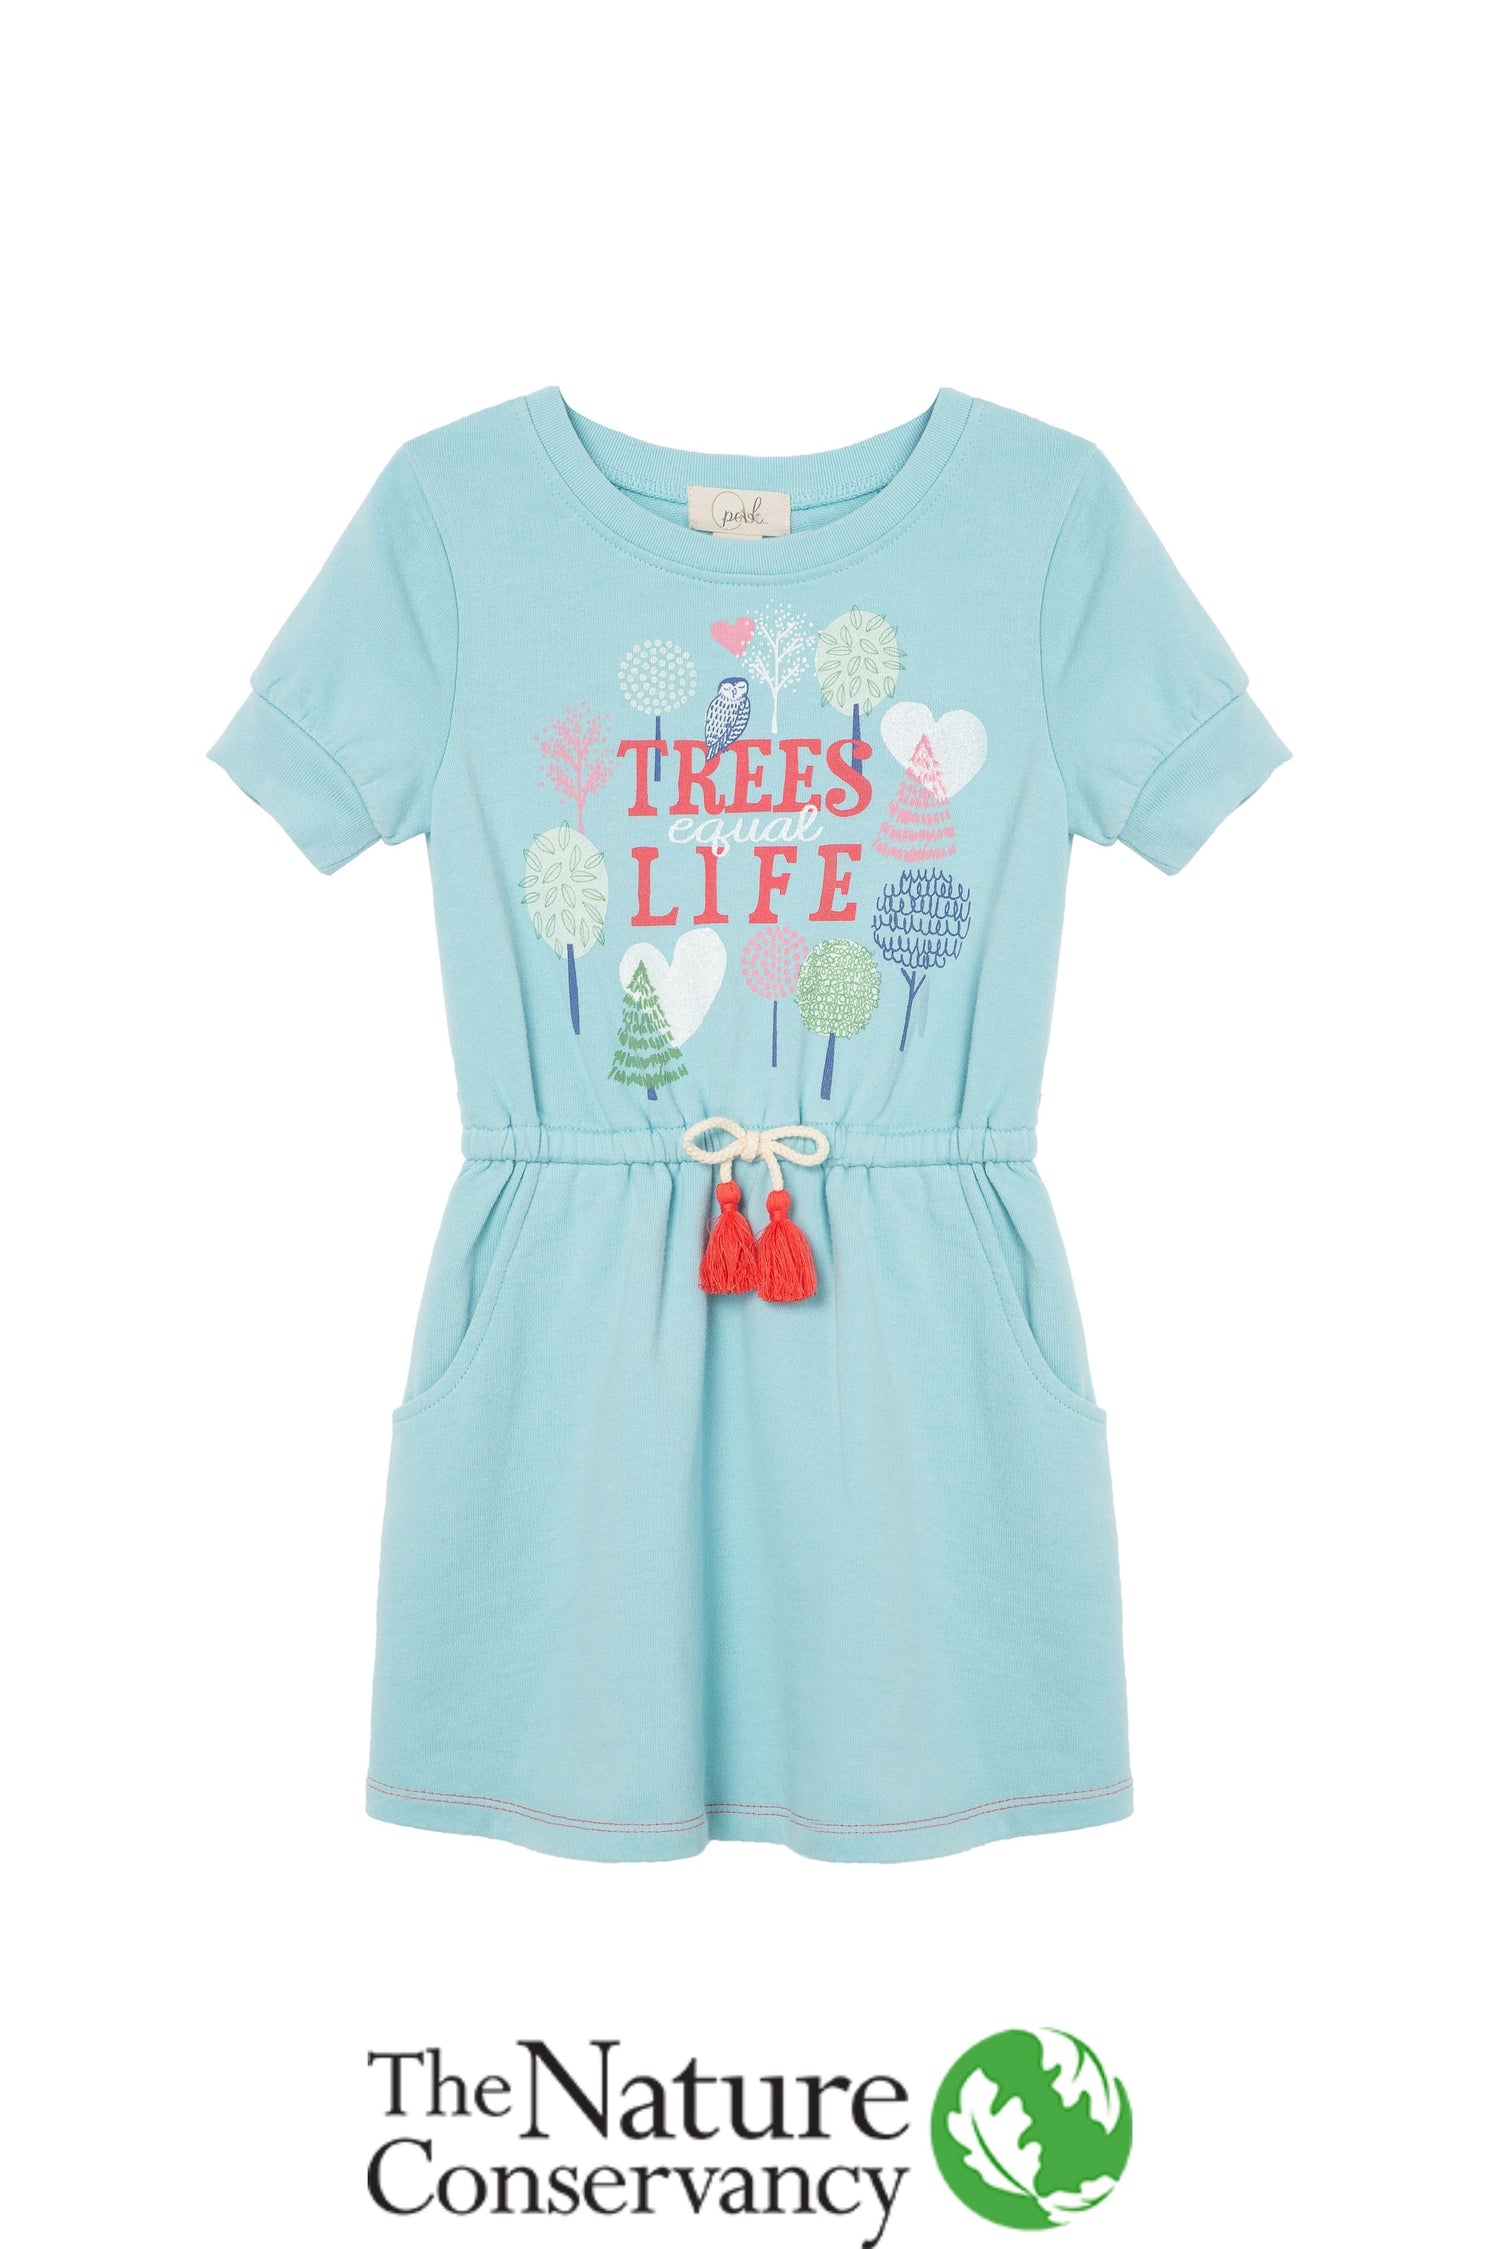 Pocketed baby blue dress with illustrated owl, trees & "trees equal life" text